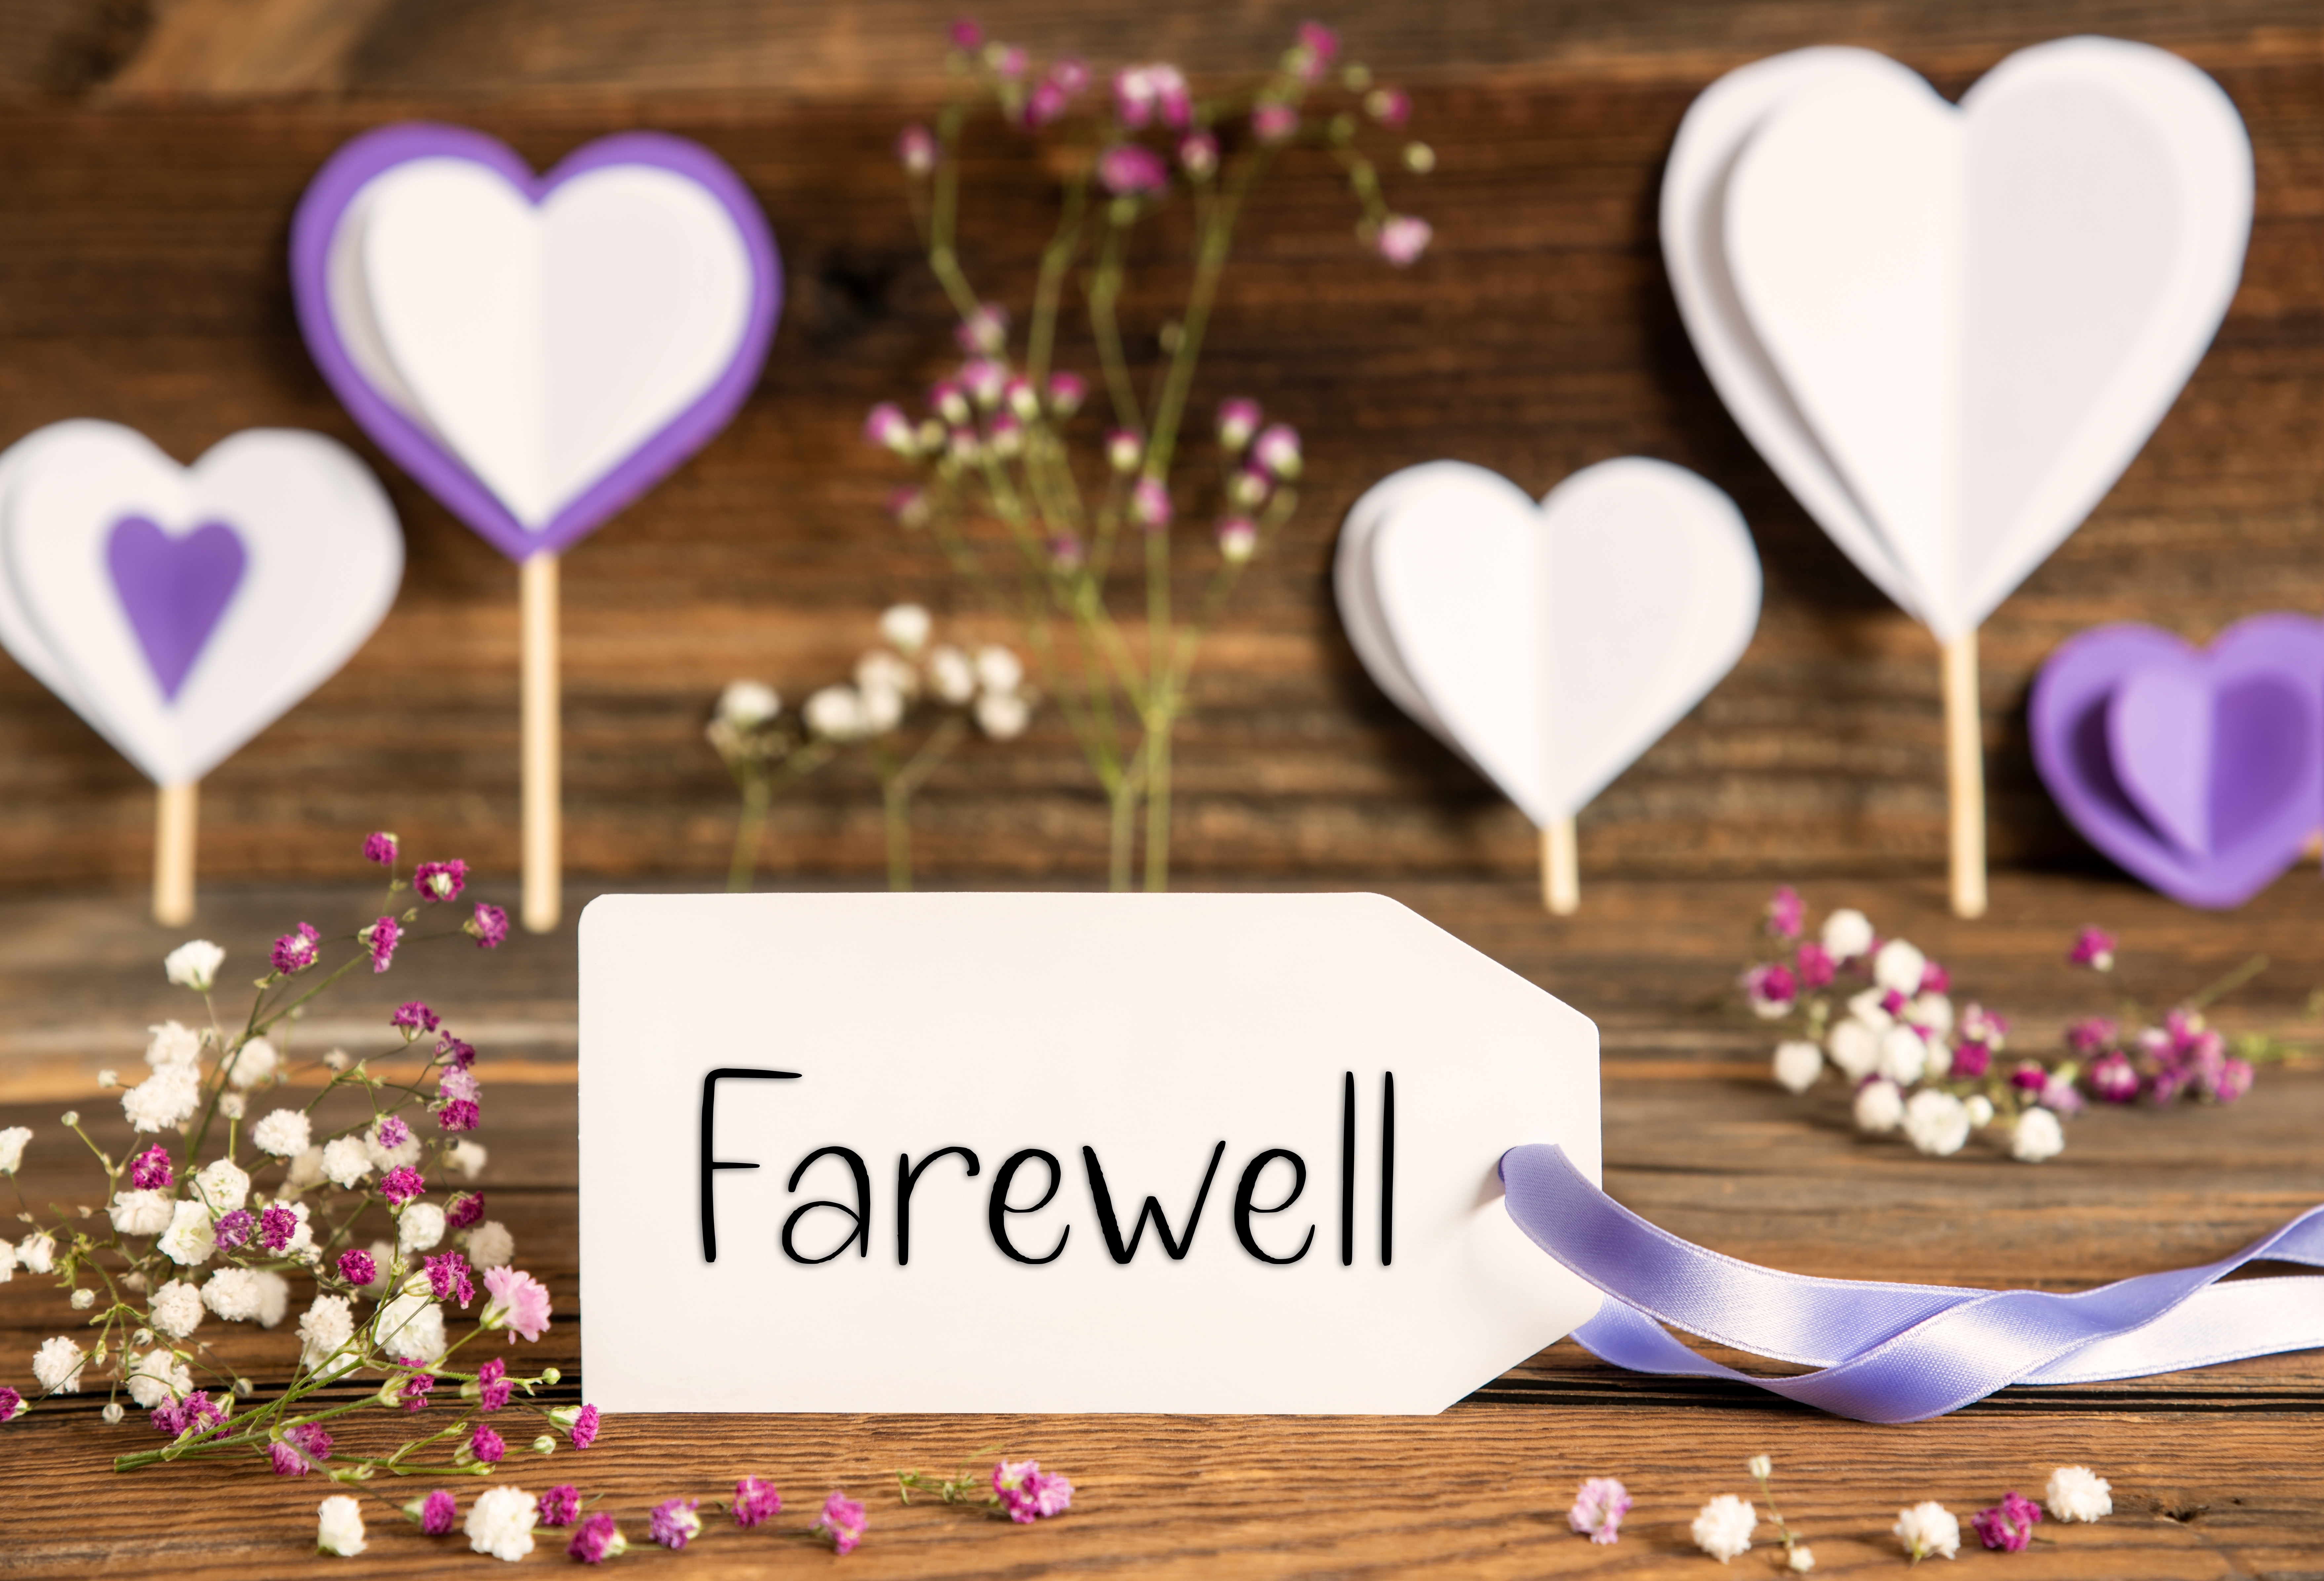 A farewell card surrounded by purple decorations | Source: Shutterstock